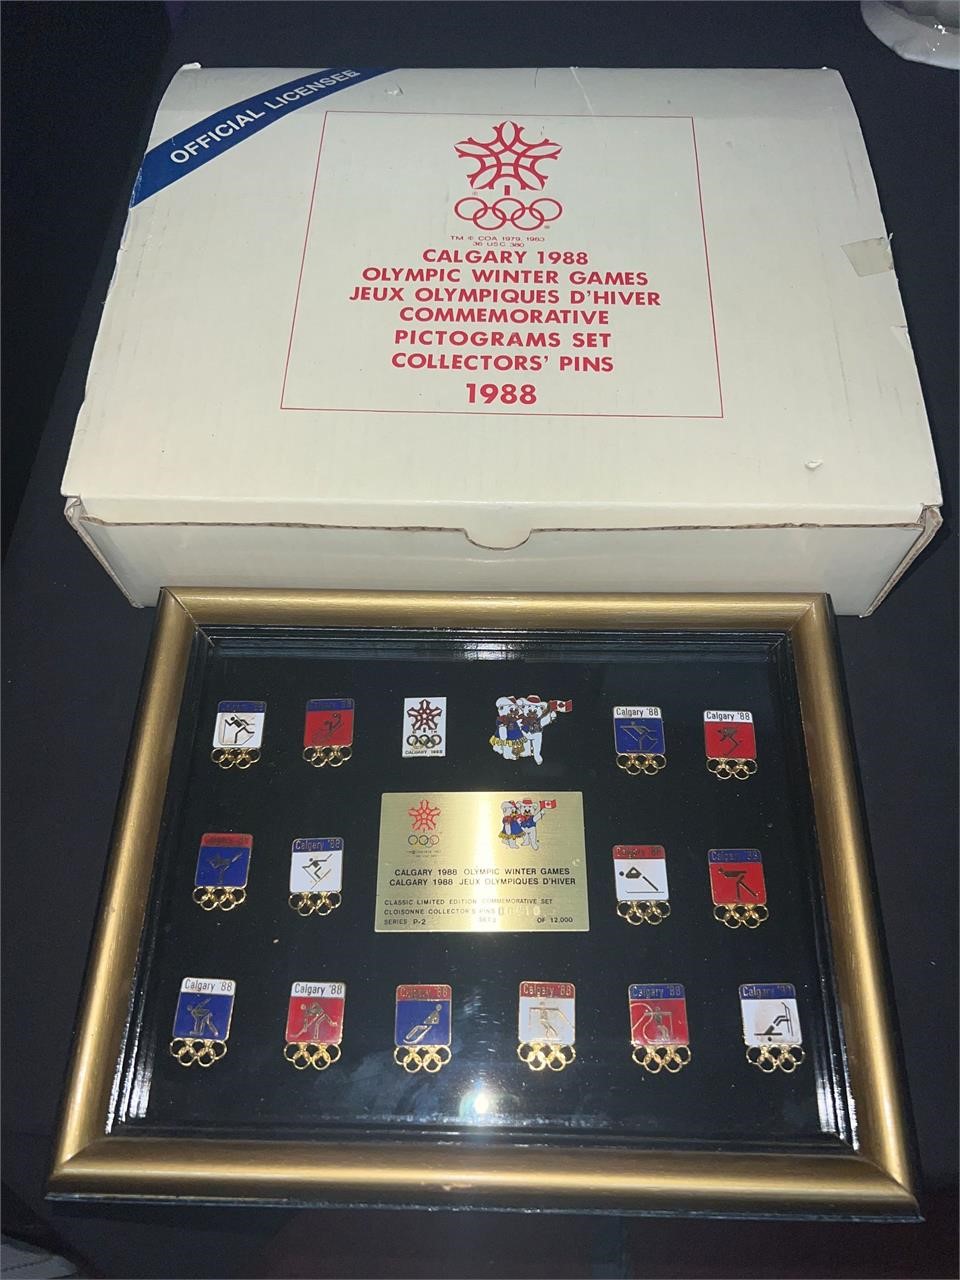 1988 OLYMPIC WINTER GAMES COLLECTORS PINS